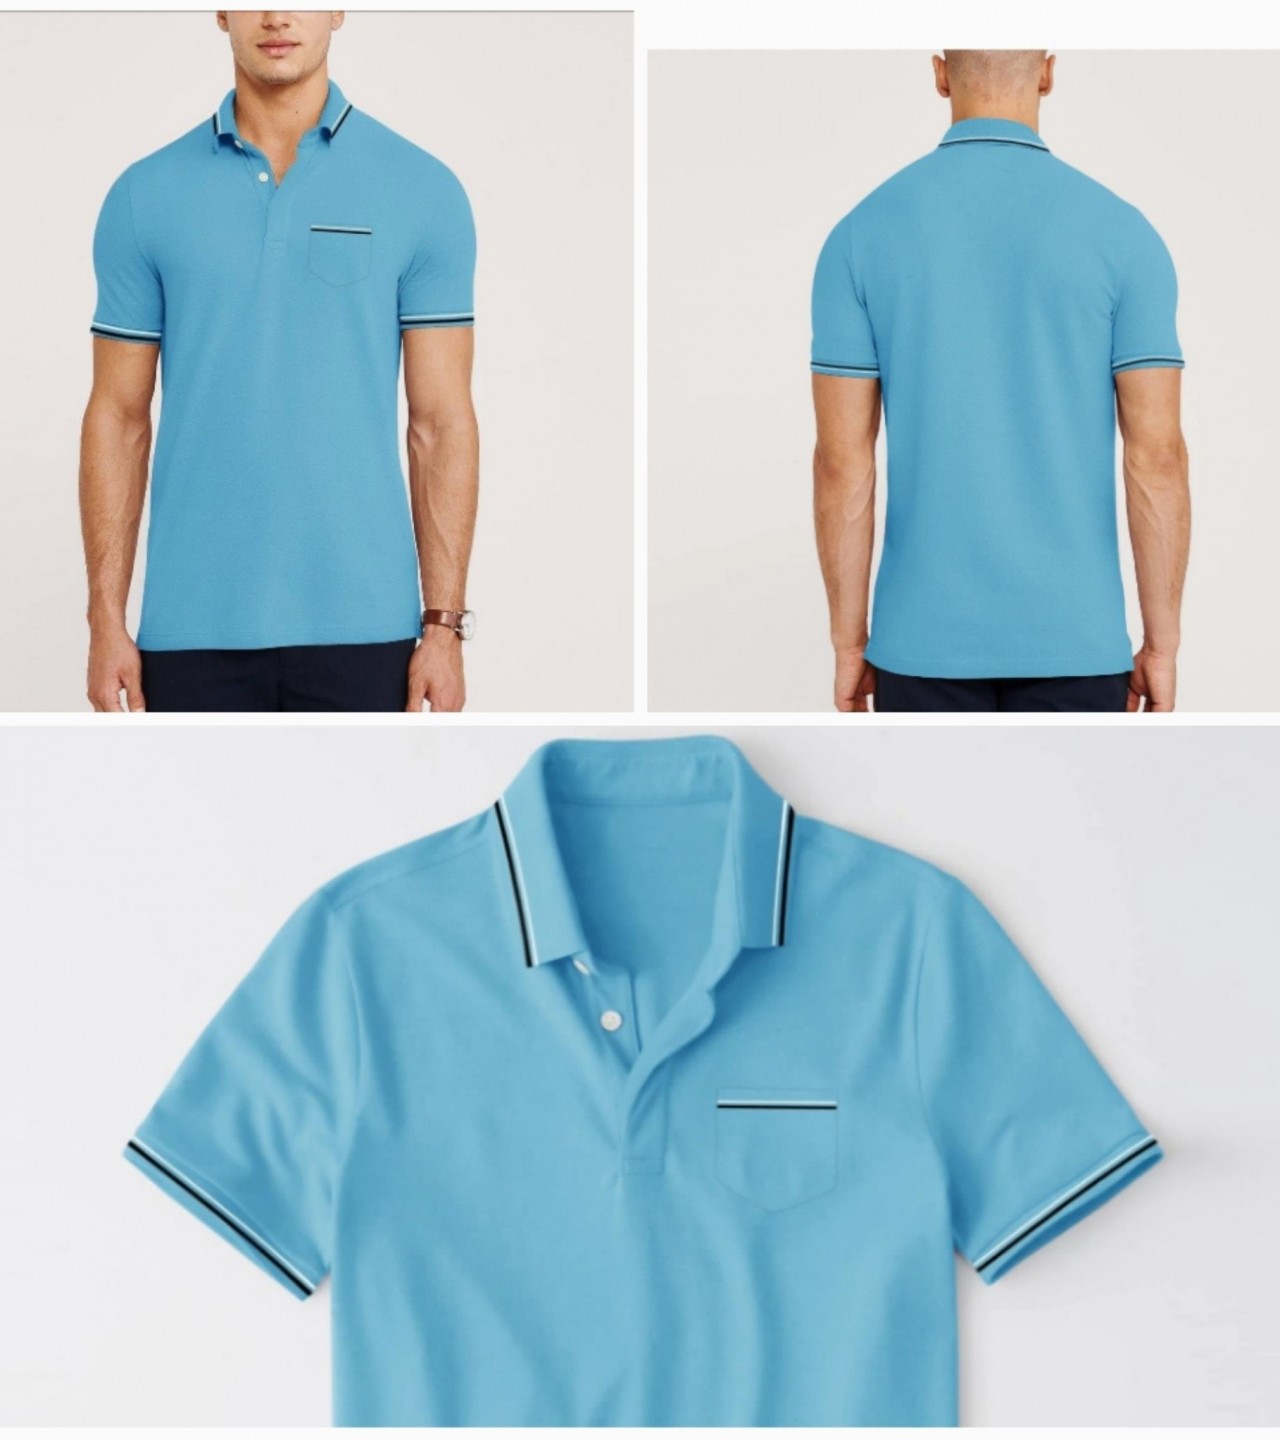 BASIC EDITION MEN'S TIPPED POLO SHIRT